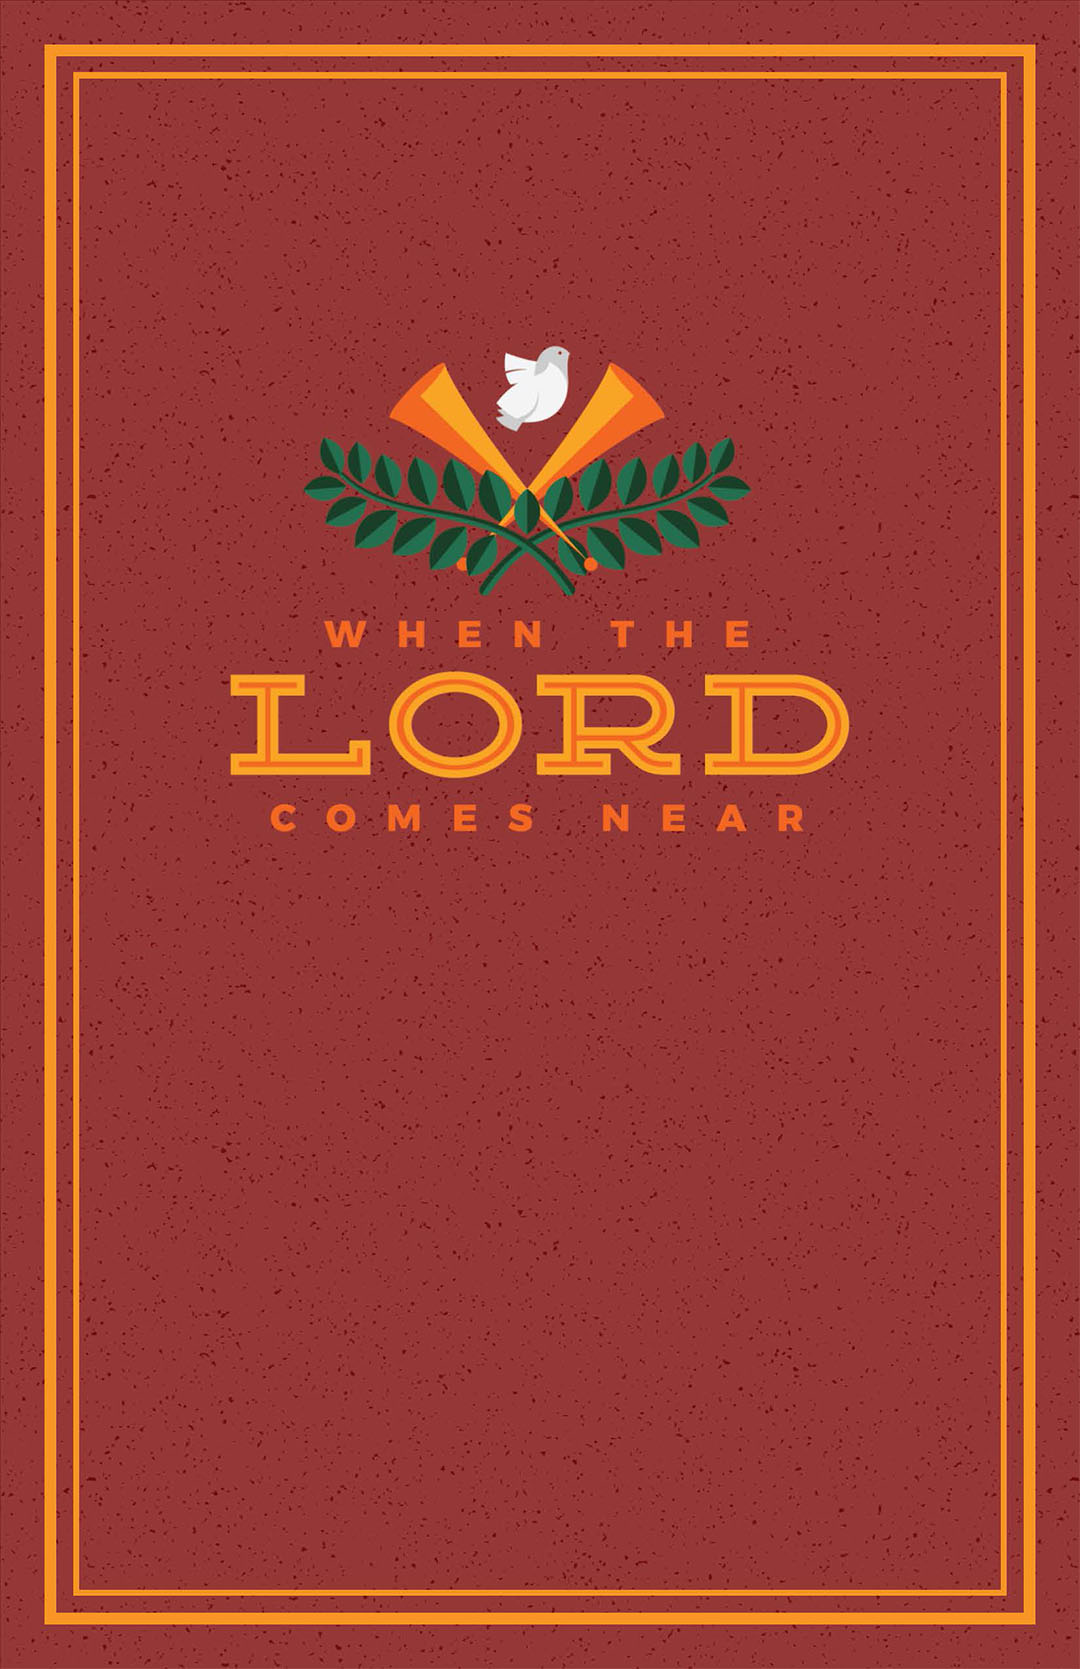 Link to When the Lord Comes Near Advent Devotion